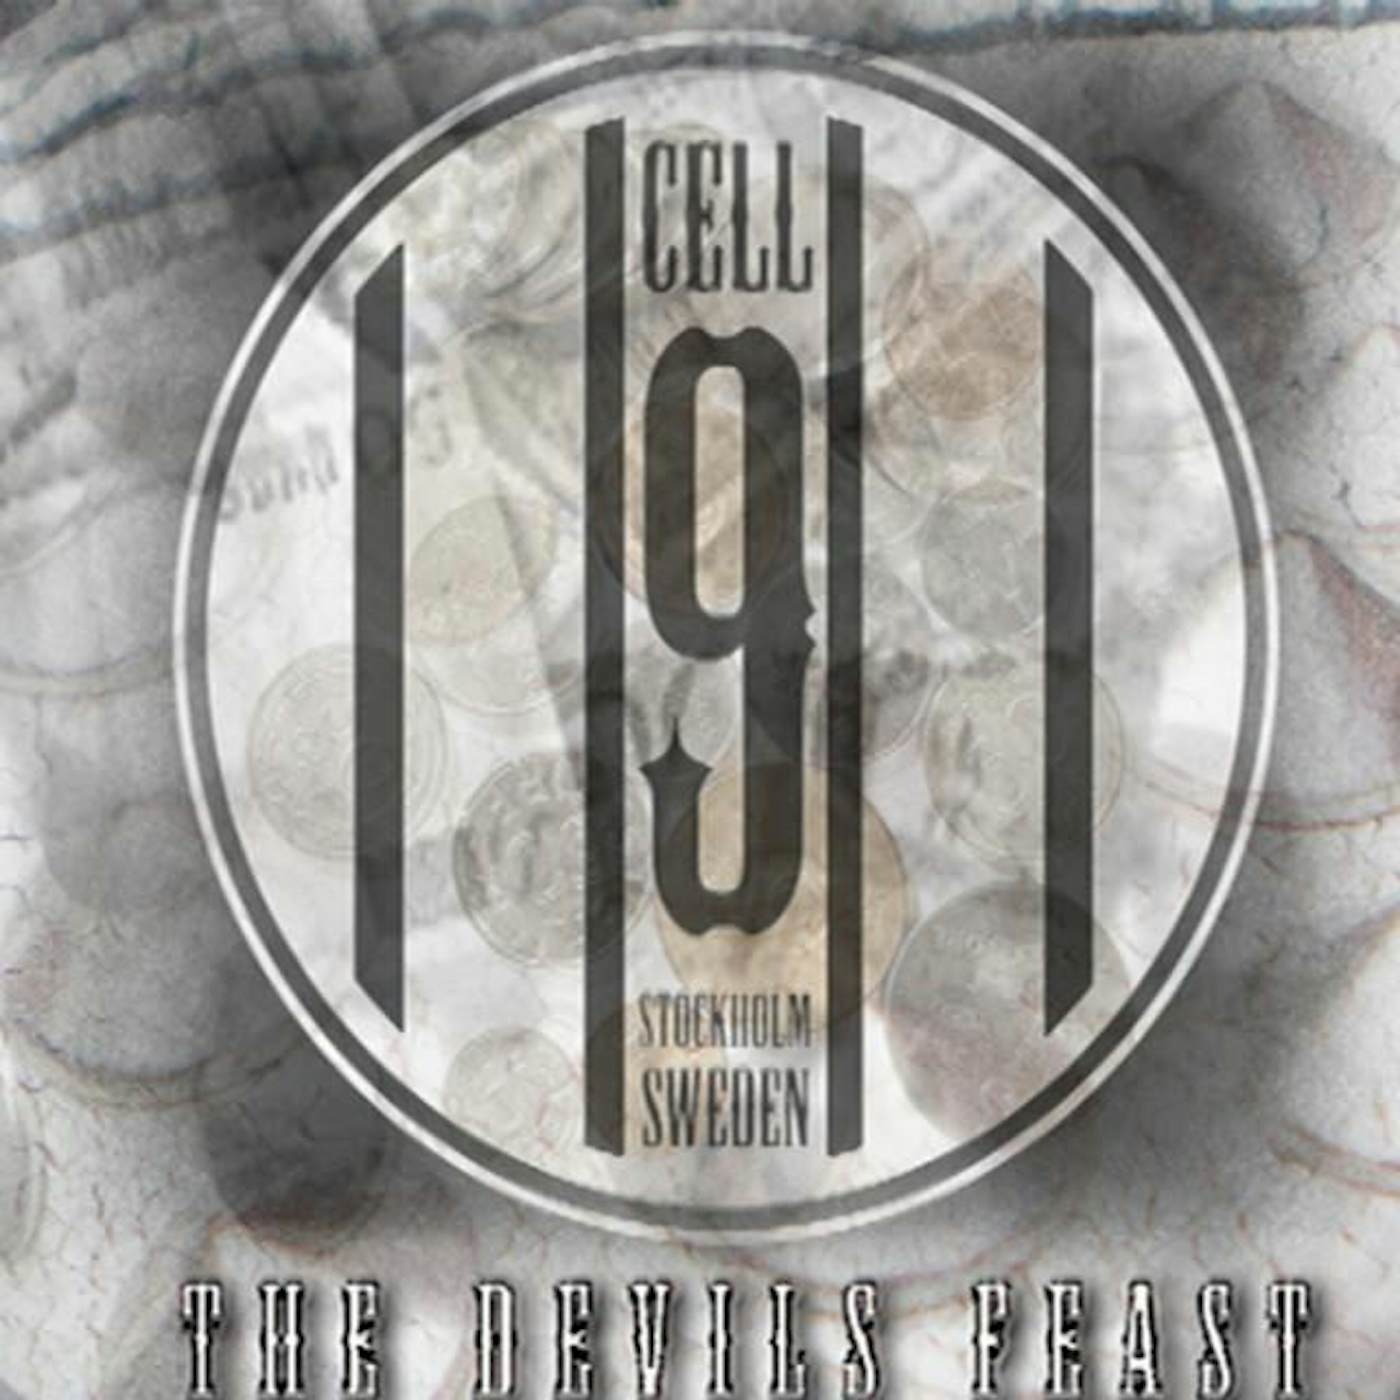 Cell 9